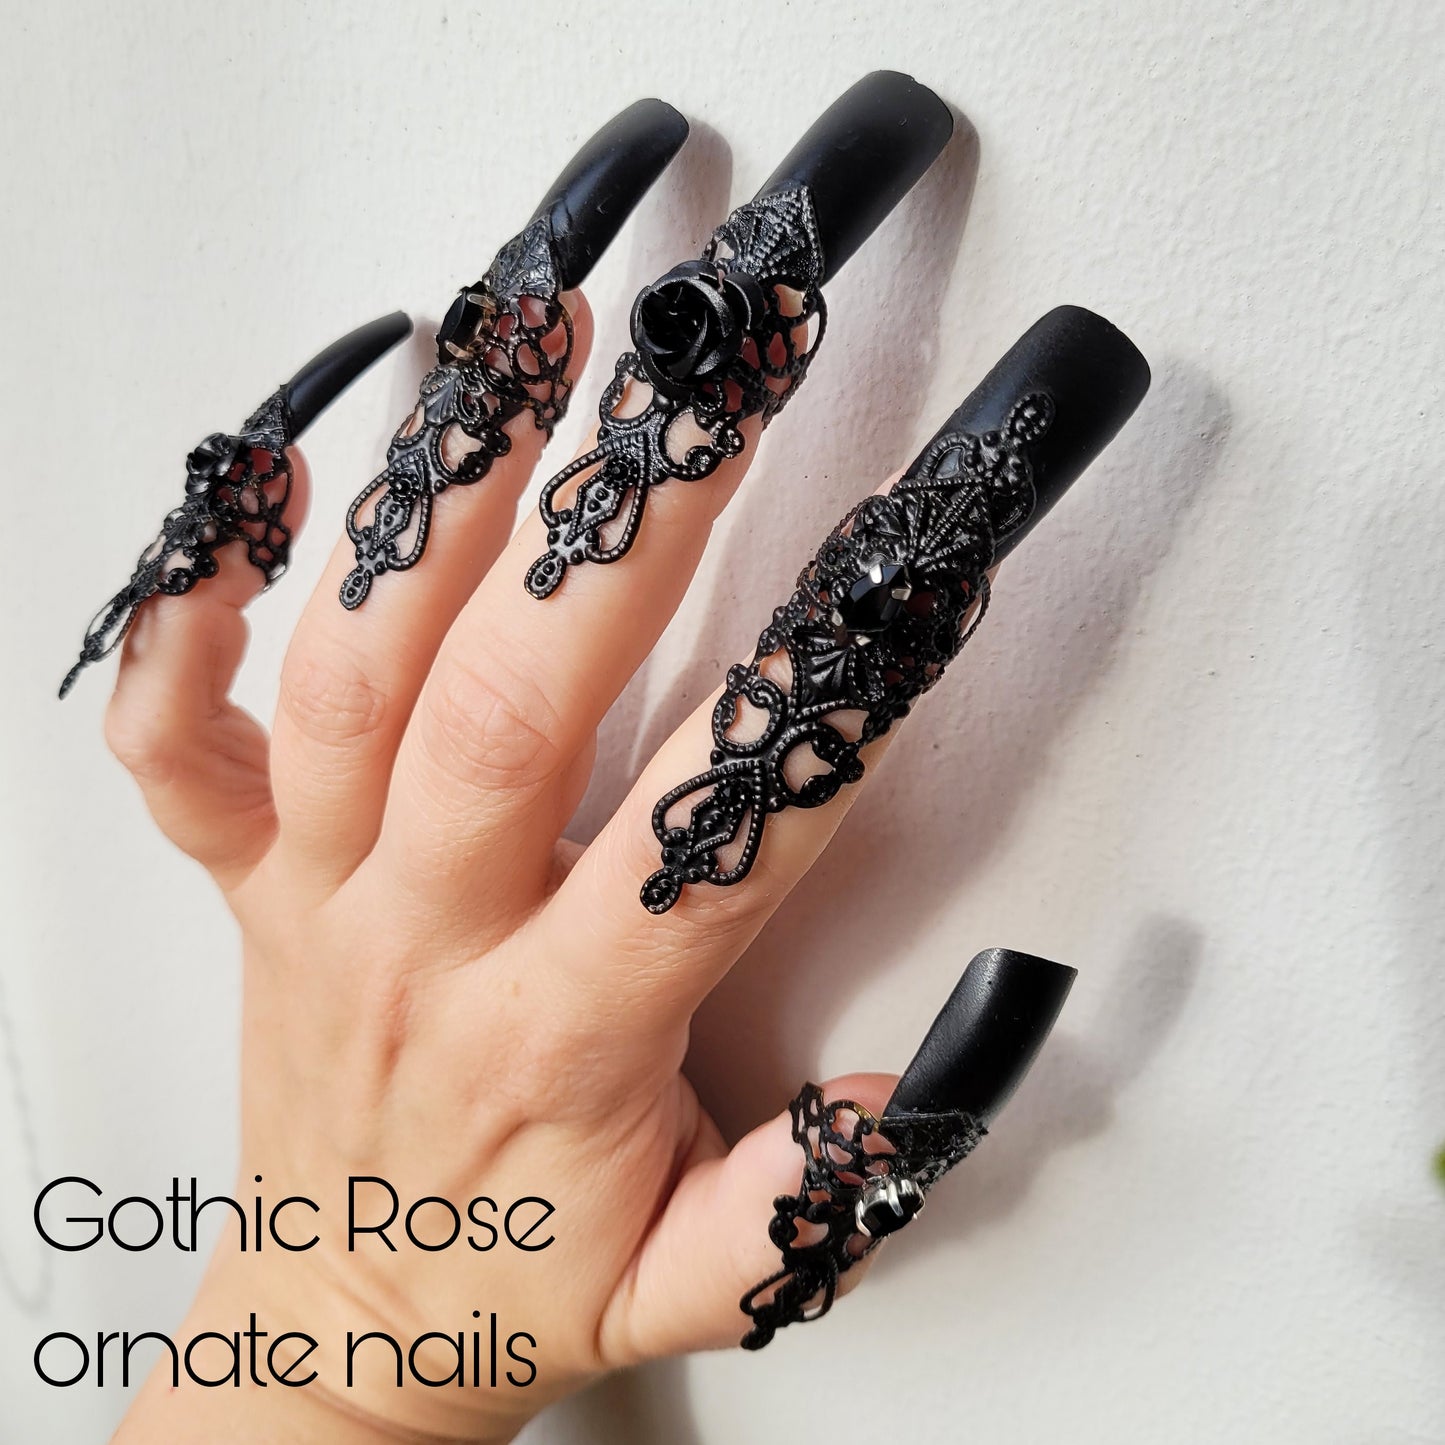 Made-to-order: the Gothic Rose ornate nails